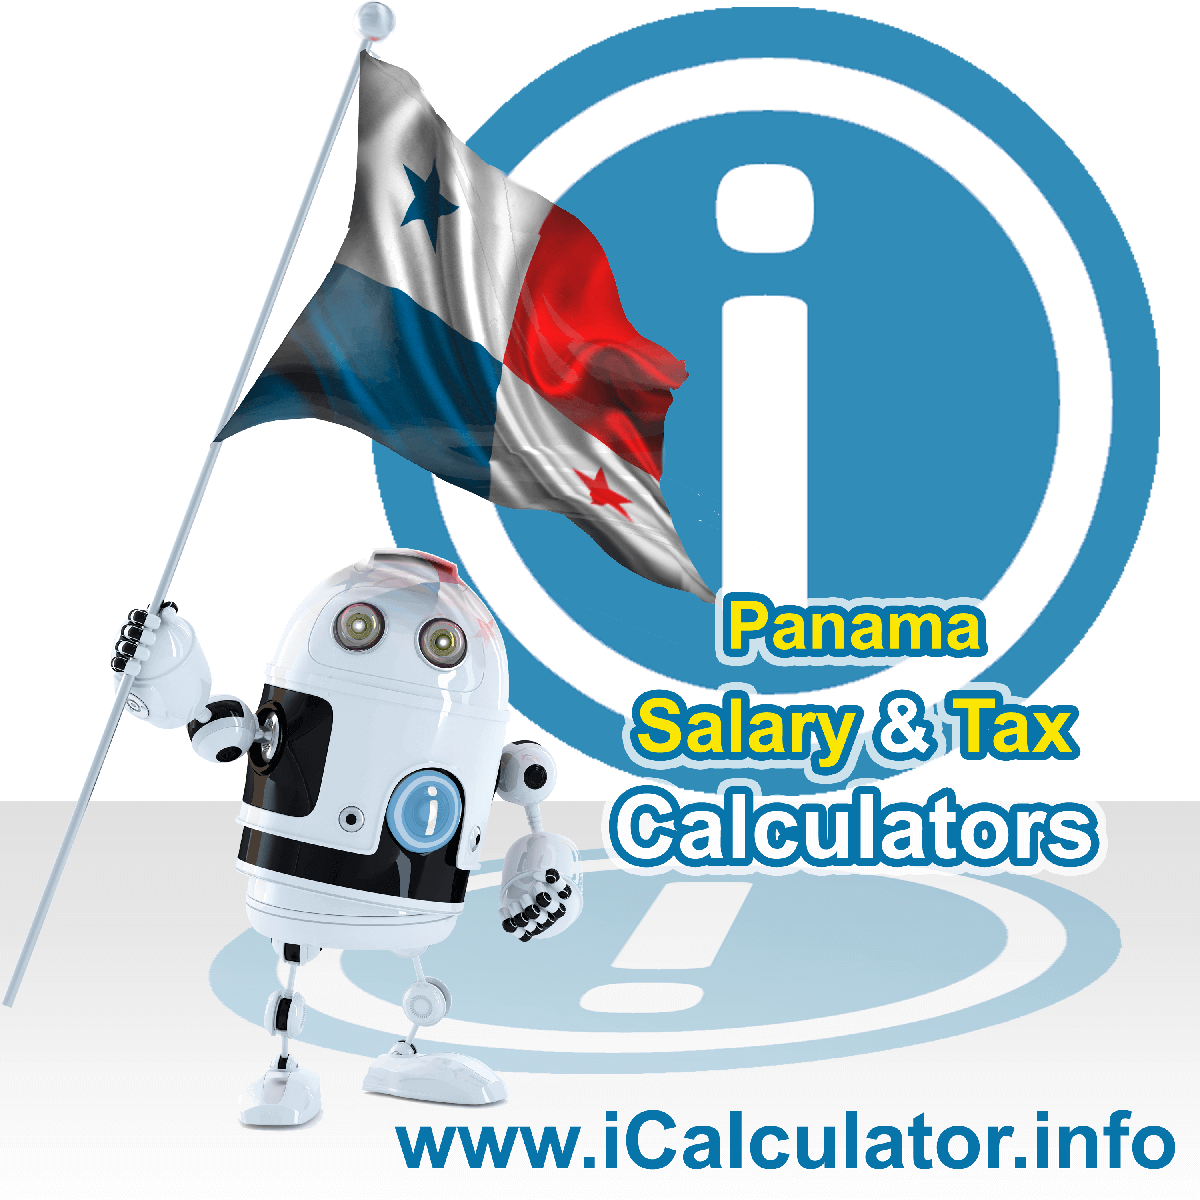 Panama Tax Calculator. This image shows the Panama flag and information relating to the tax formula for the Panama Salary Calculator